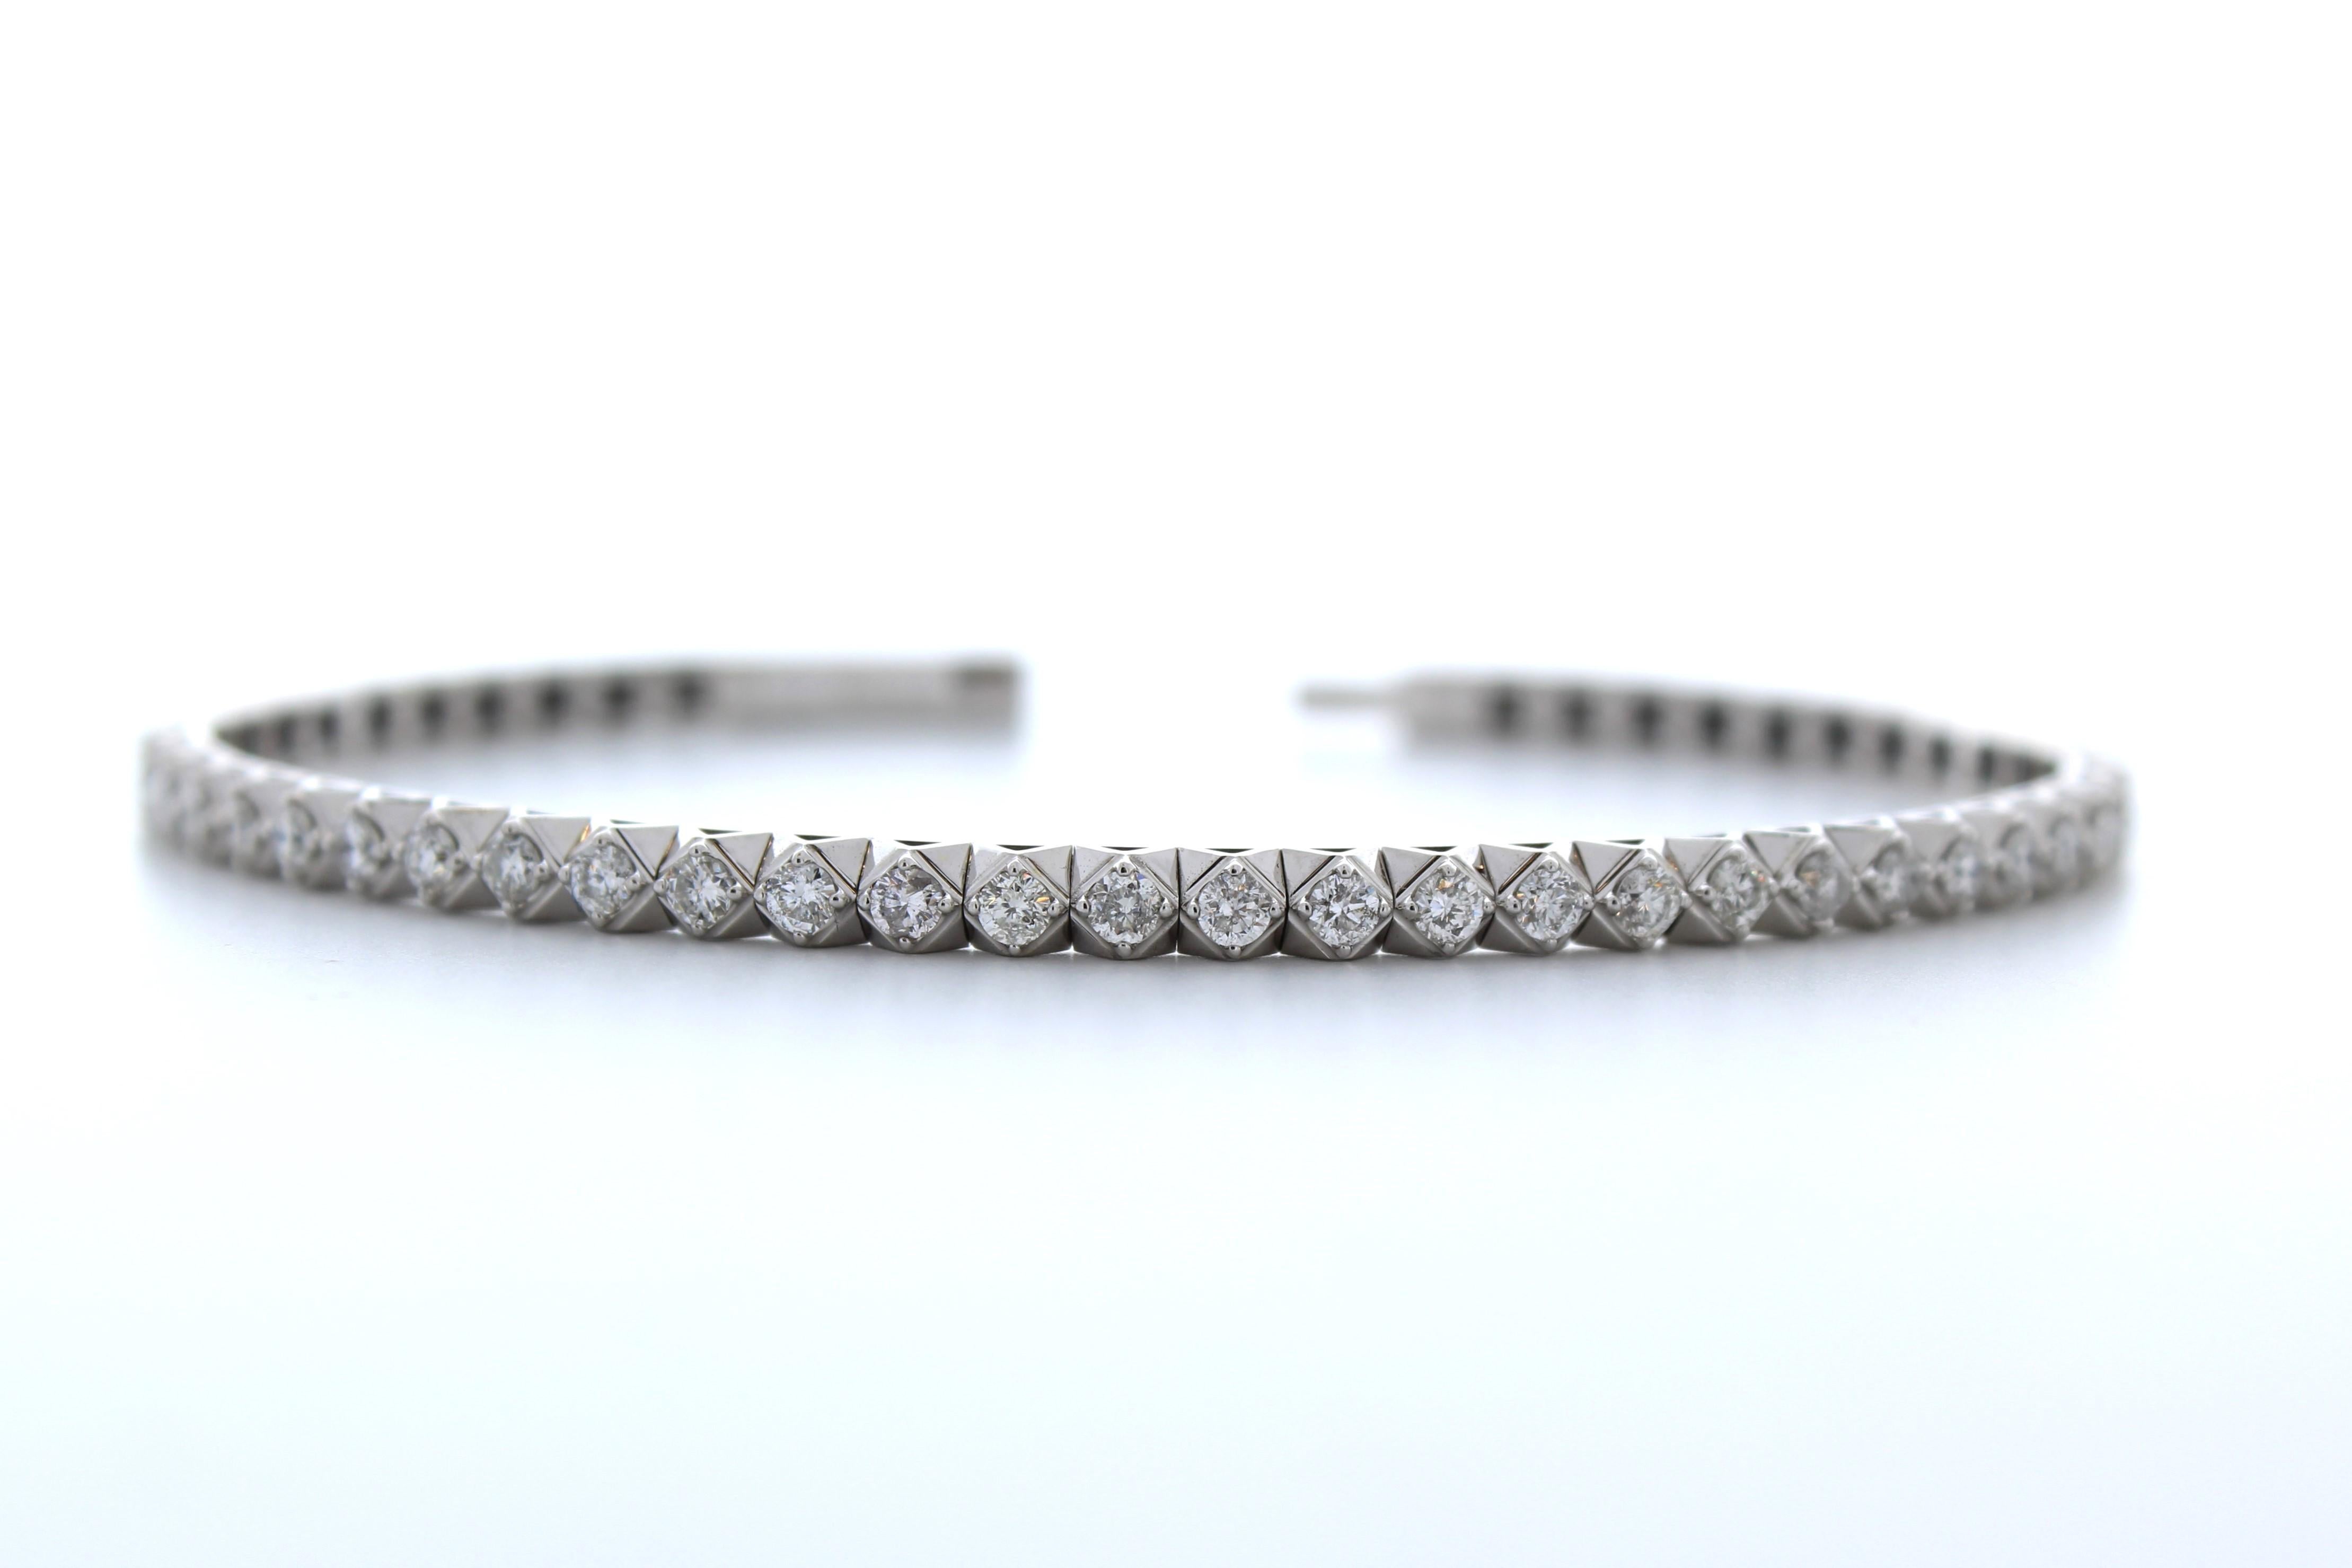 The 2.00 carat total weight fashion bracelet with 52 round diamonds in 14k white gold is a stunning and elegant piece of jewelry that will add a touch of luxury to any outfit. The bracelet features 52 round diamonds with a total weight of 2.00